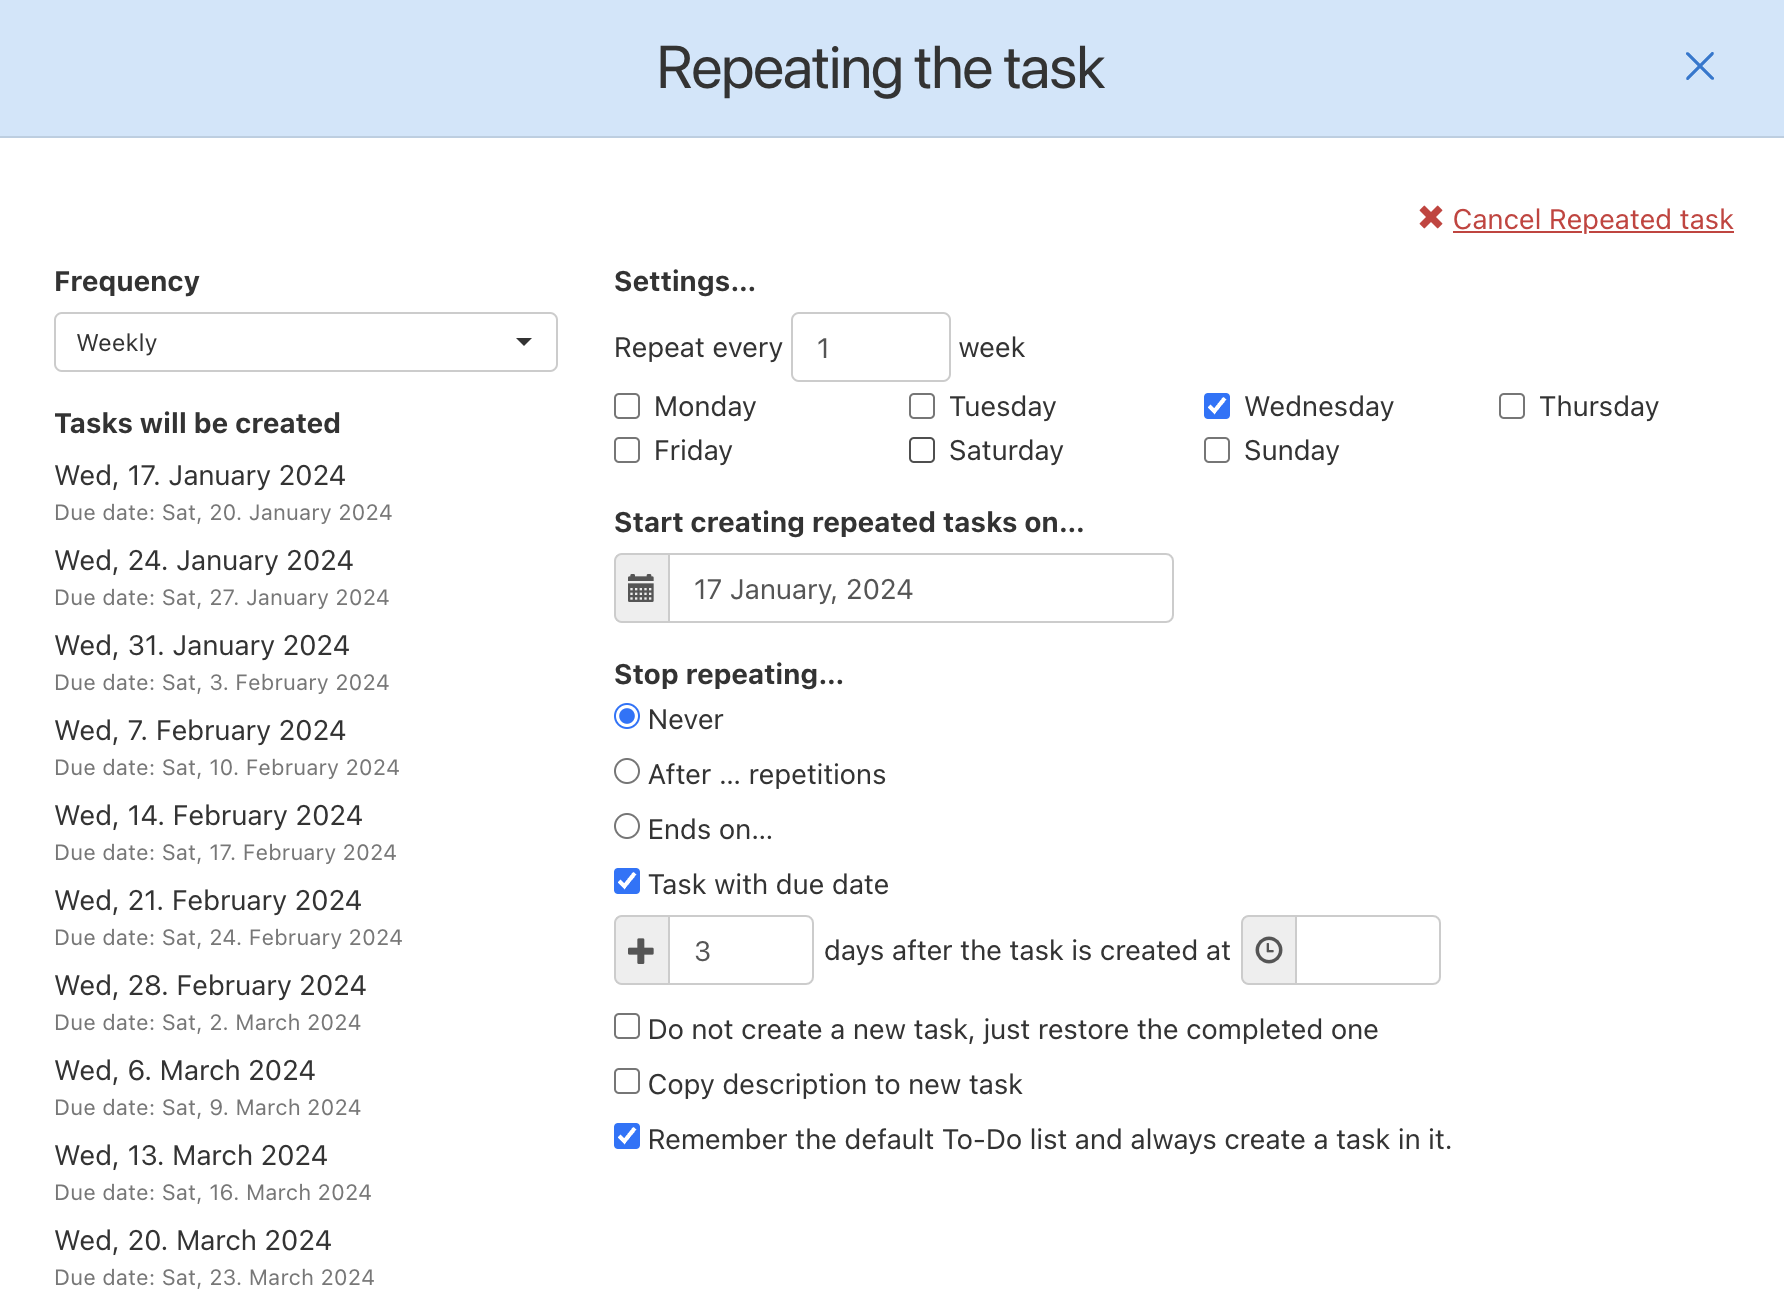 How to set up repeated tasks on a weekly basis.